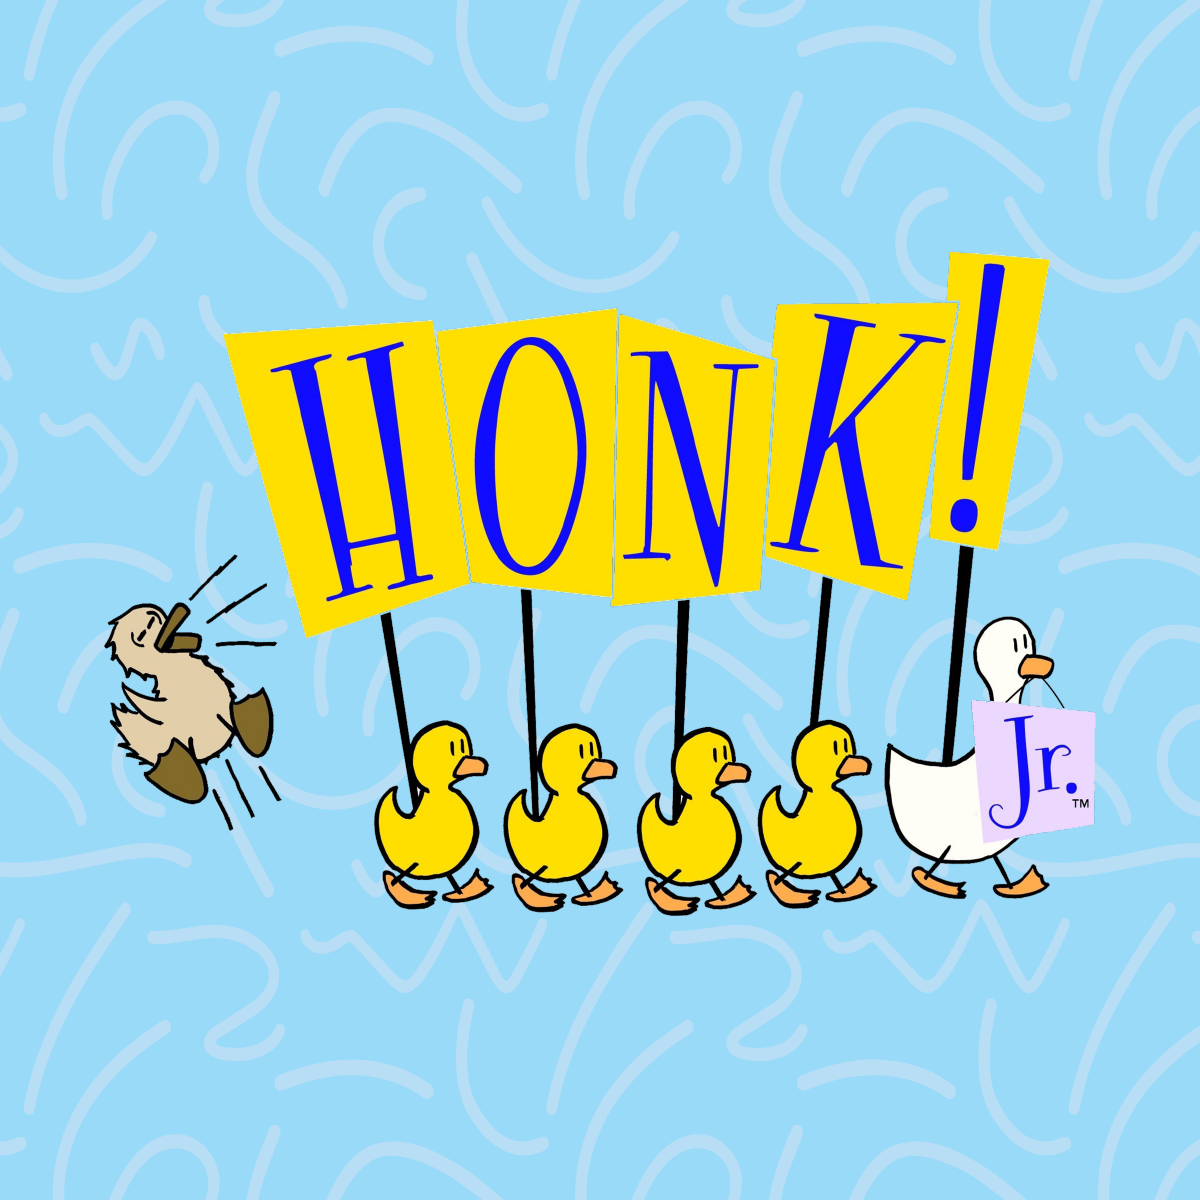 Cartoon illustration of four yellow ducklings following a white mother duck, all holding signs that spell out Honk Jr, while a brown "ugly duckling" follows behind exclaiming